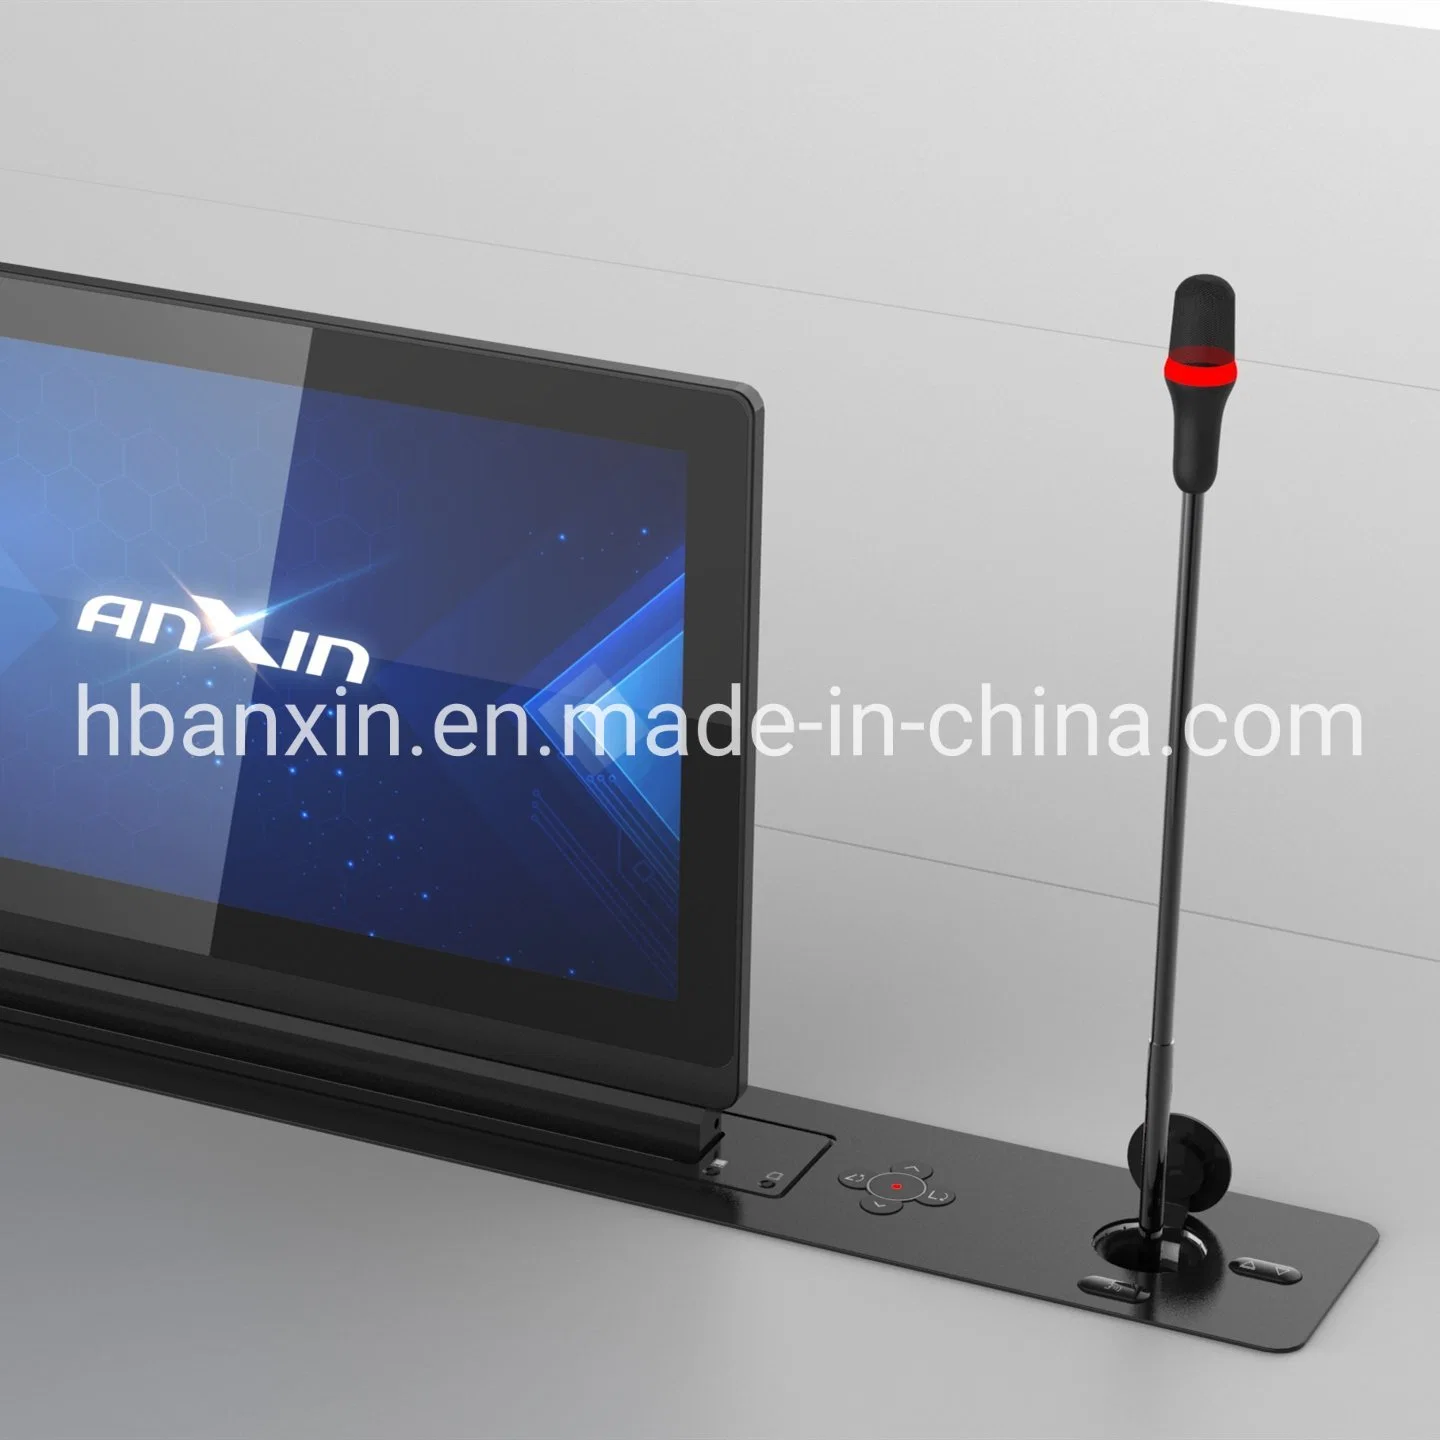 Anxin Slim LCD Monitor Screen Motorized Lift with Microphone and Conference Audio System